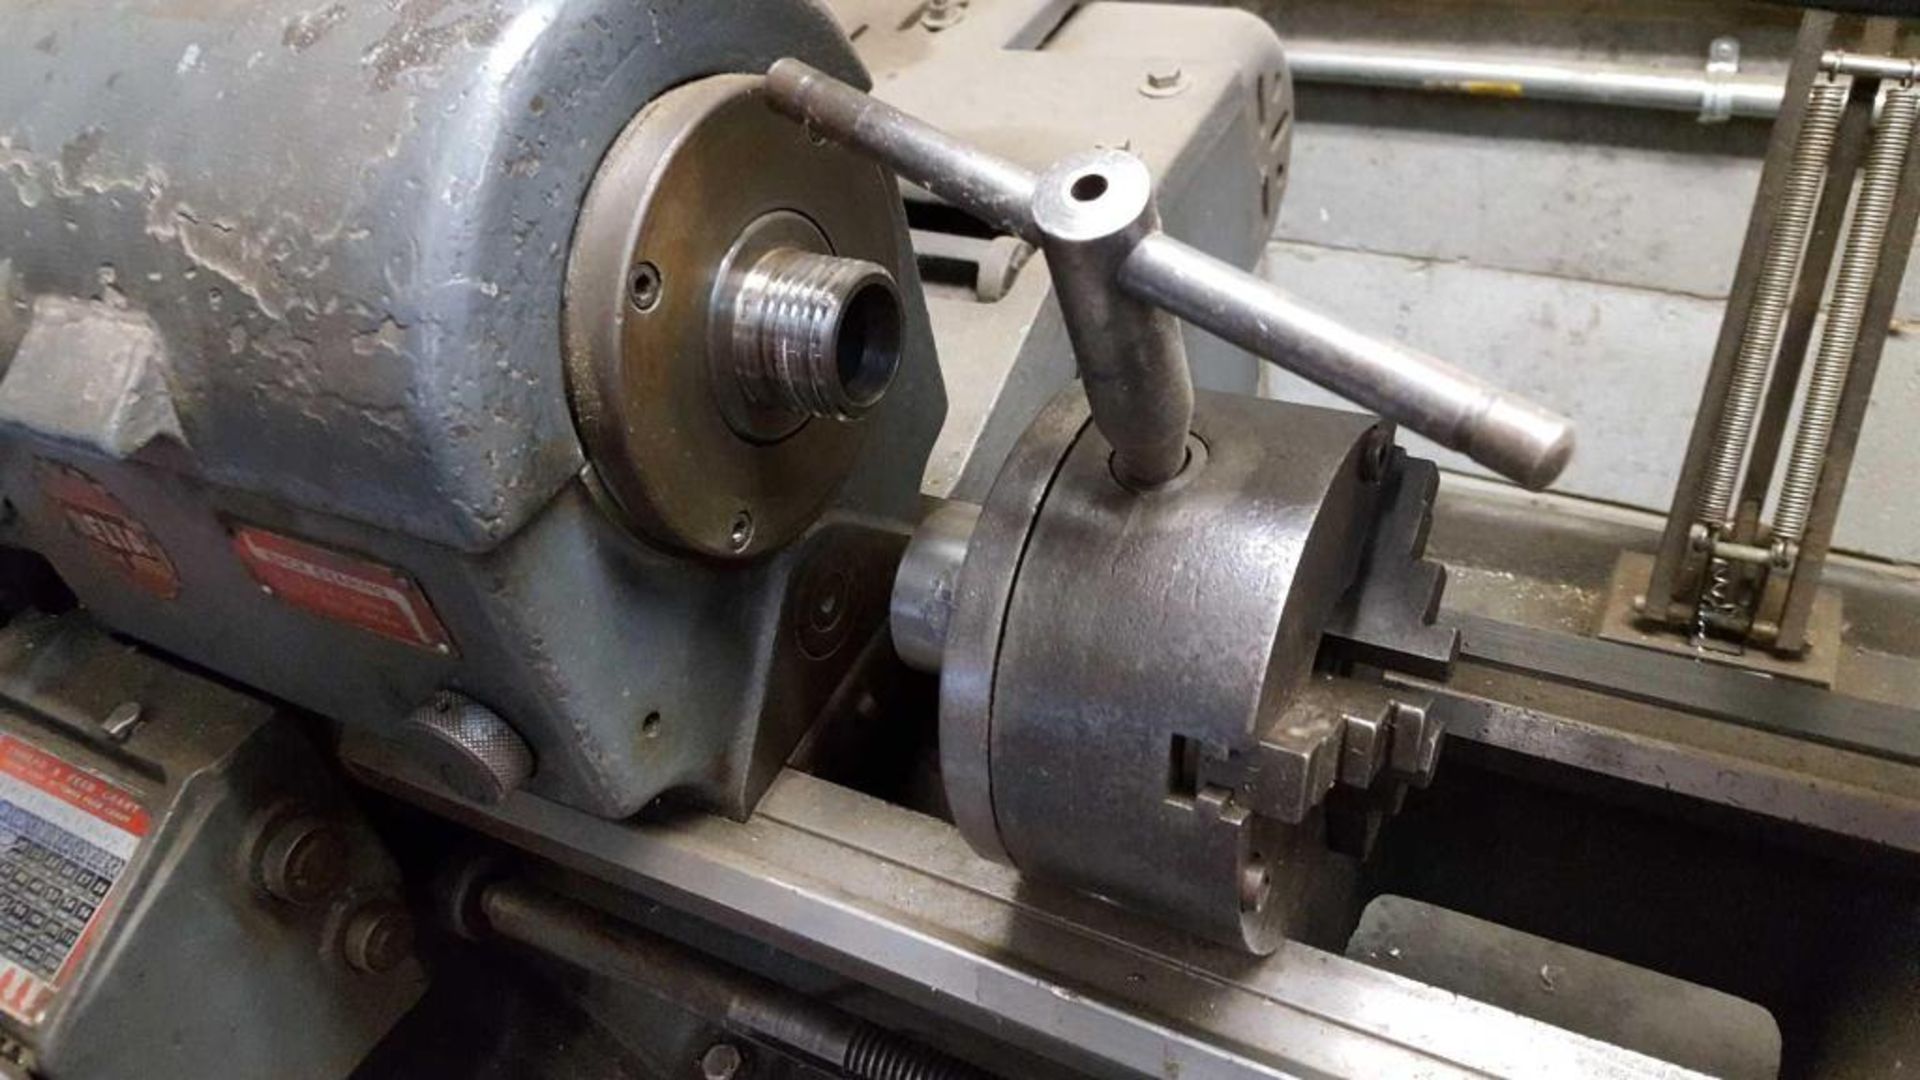 Delta Rockwell tool room lathe, 12" swing X 30" between centers, 6" 3-jaw chuck, 3 PH - Image 3 of 6